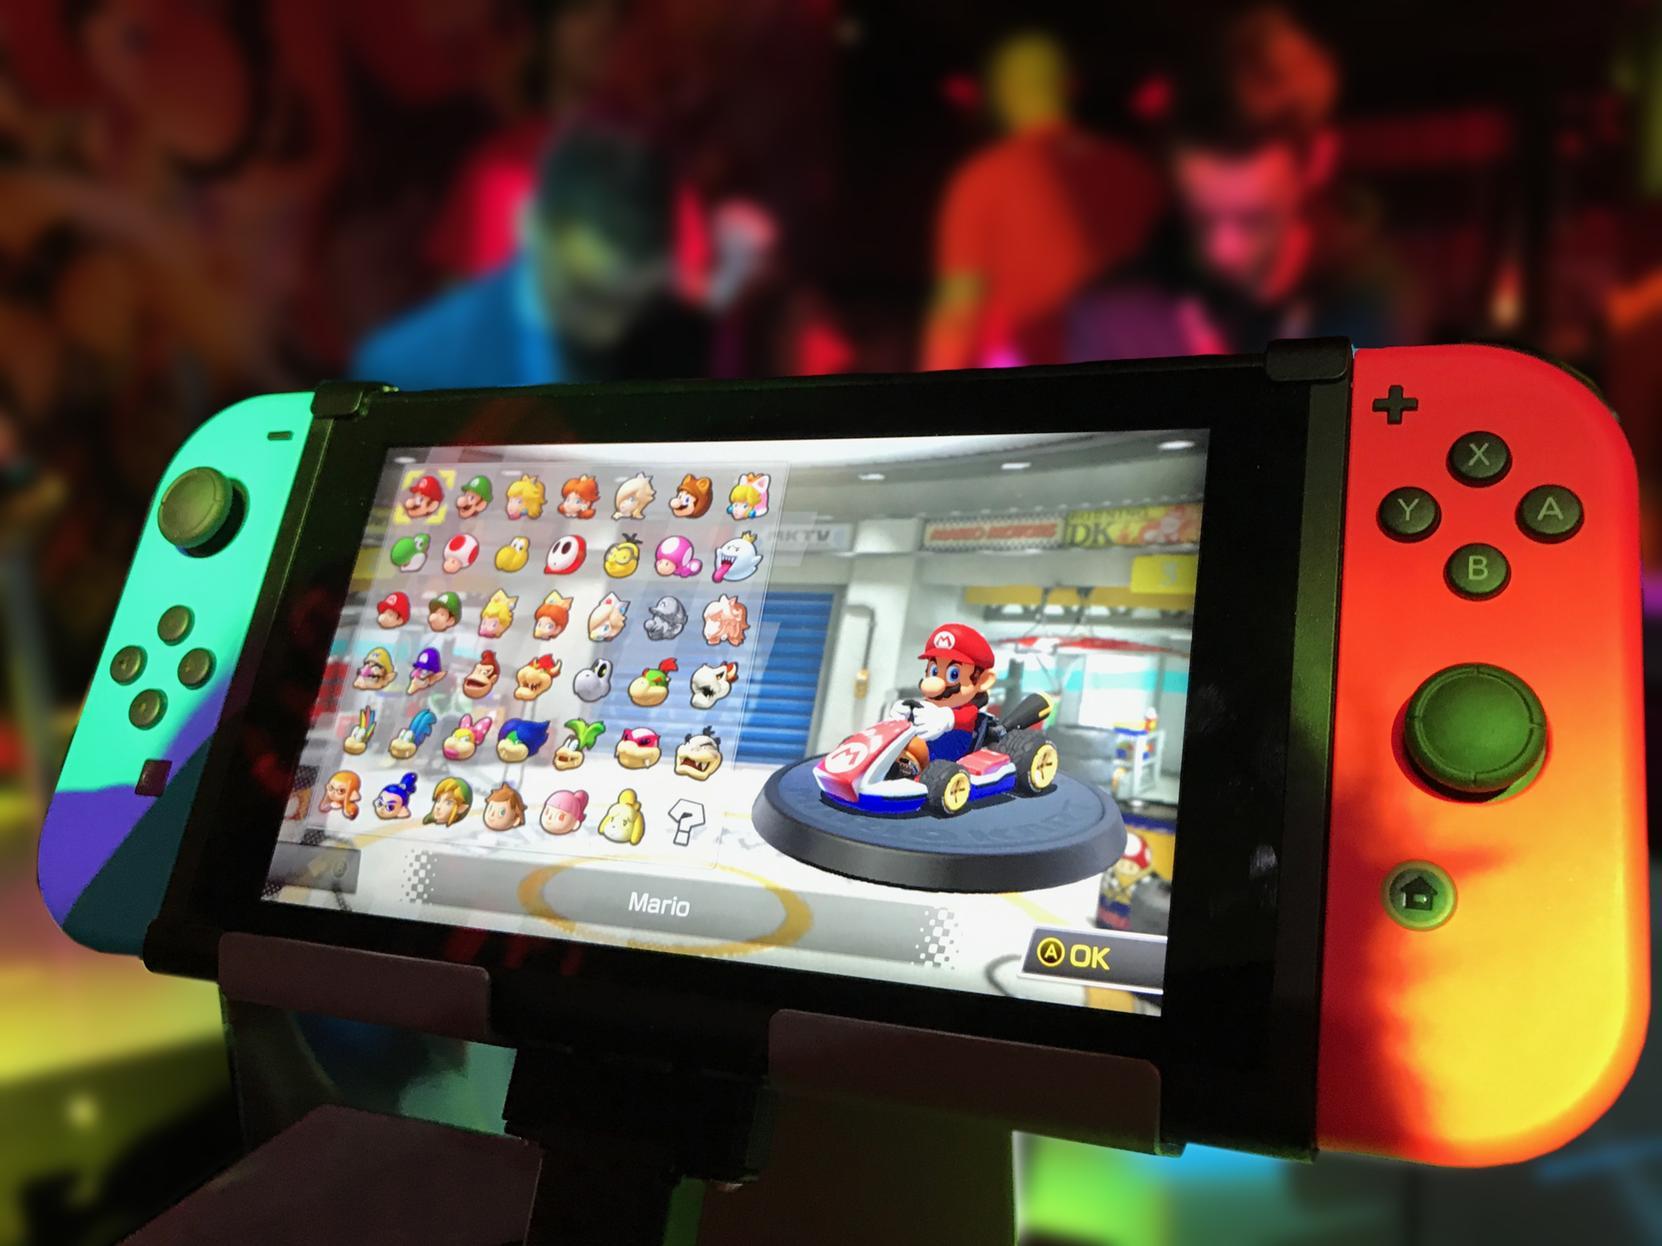 The Switch's introduction in 2017 as the first console which could be played on the big screen at home and on the move was such a success that it returned the previously struggling Japanese firm to profitability.